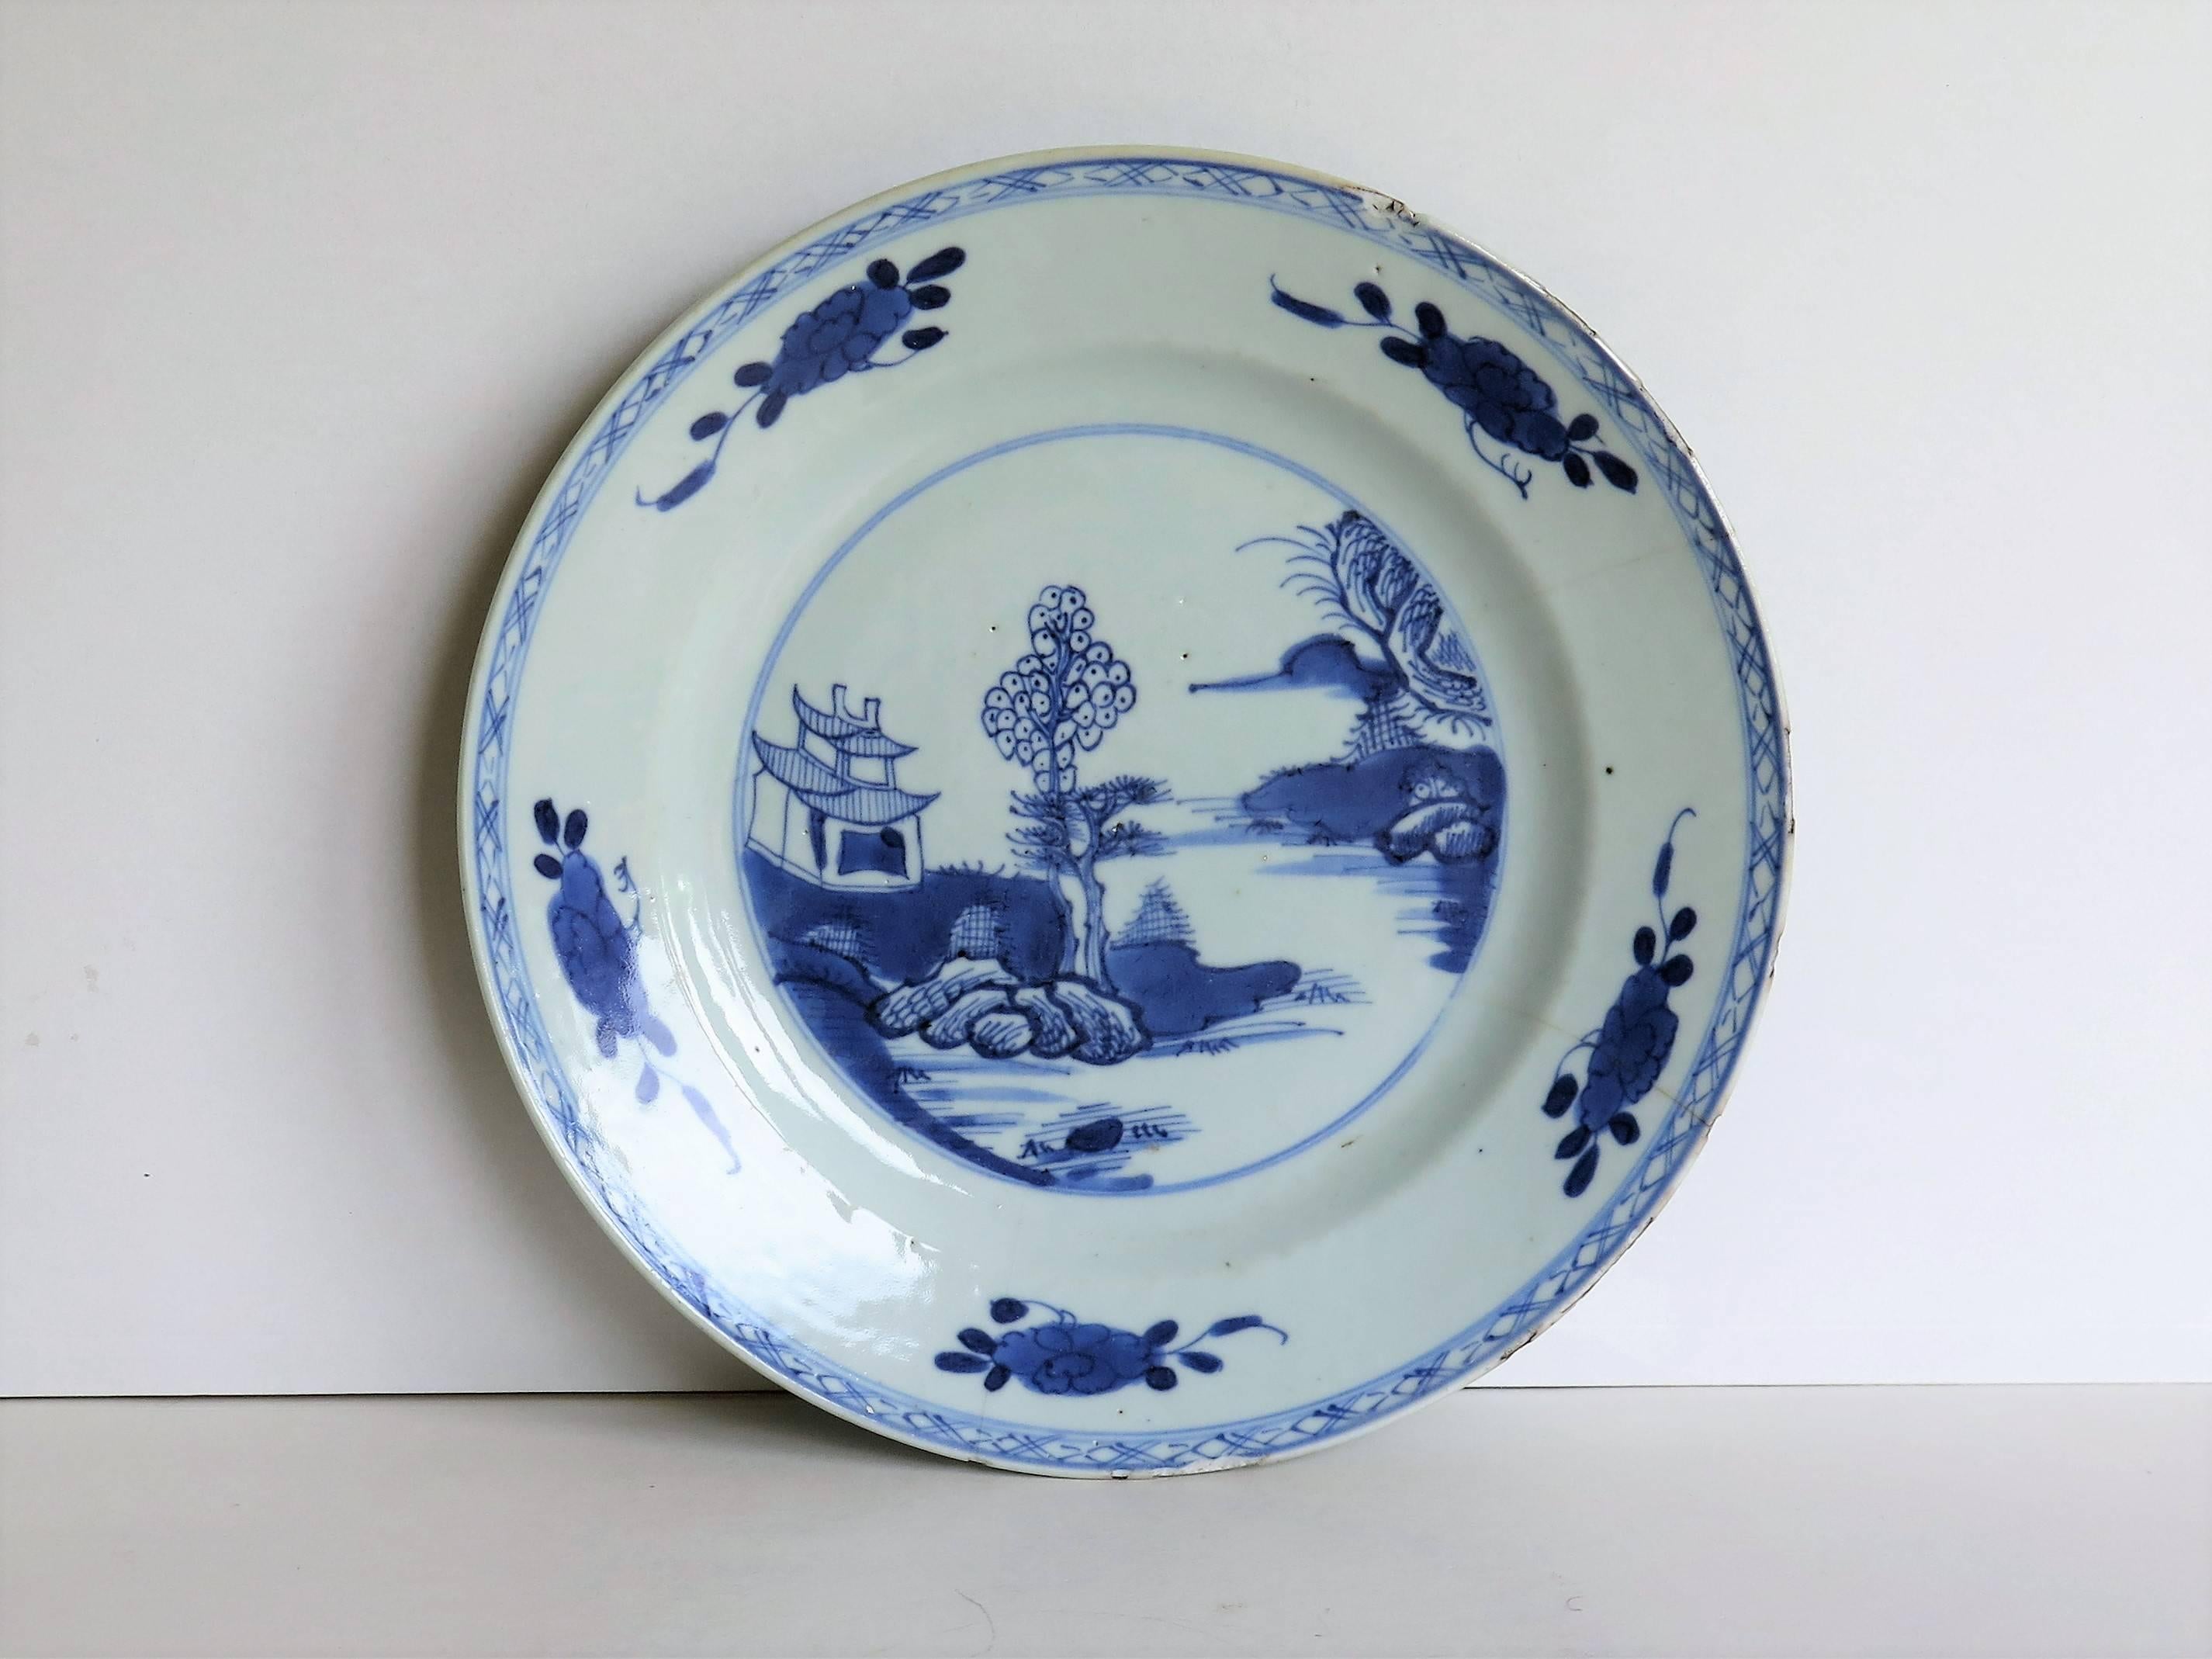 This is a hand-painted Chinese porcelain plate and makes a good display or wall plate.

The plate is well potted with a lovely glassy light blue glaze

The plate has a very attractive well set out design that is carefully hand-painted in varying